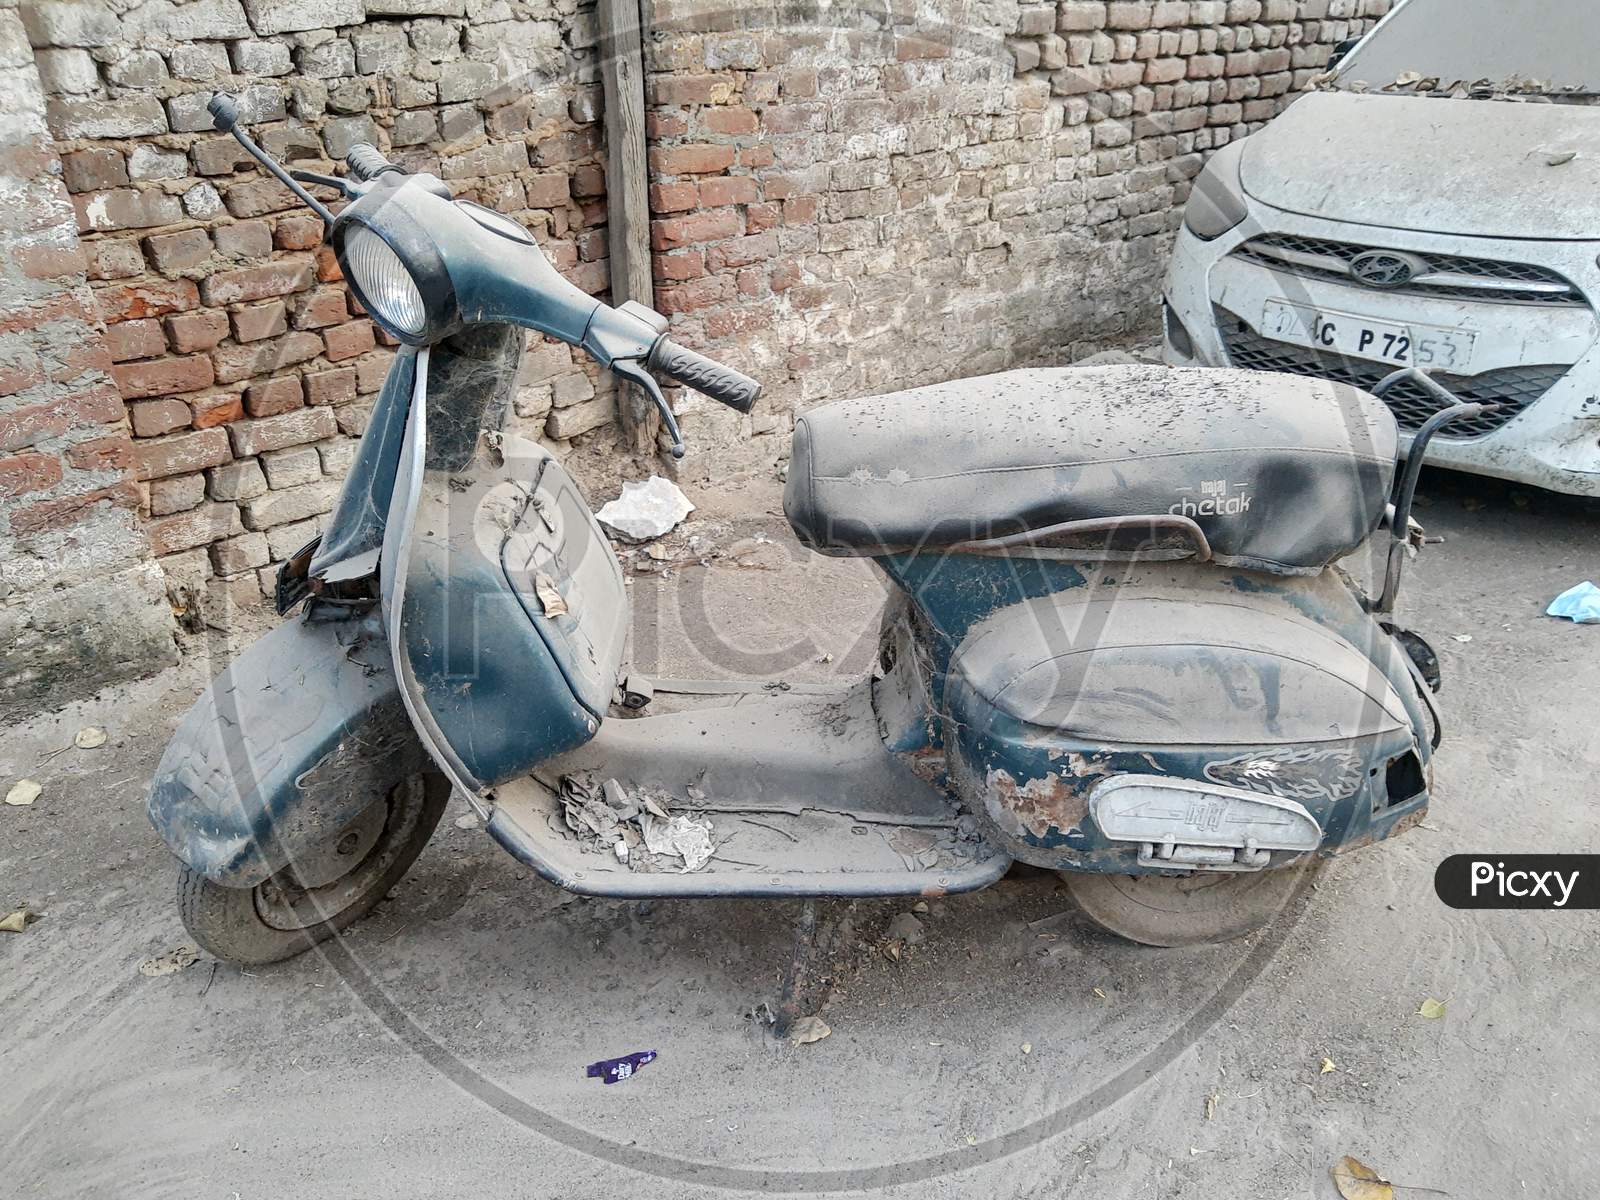 An Old Bajaj Scooter On The Street Of India